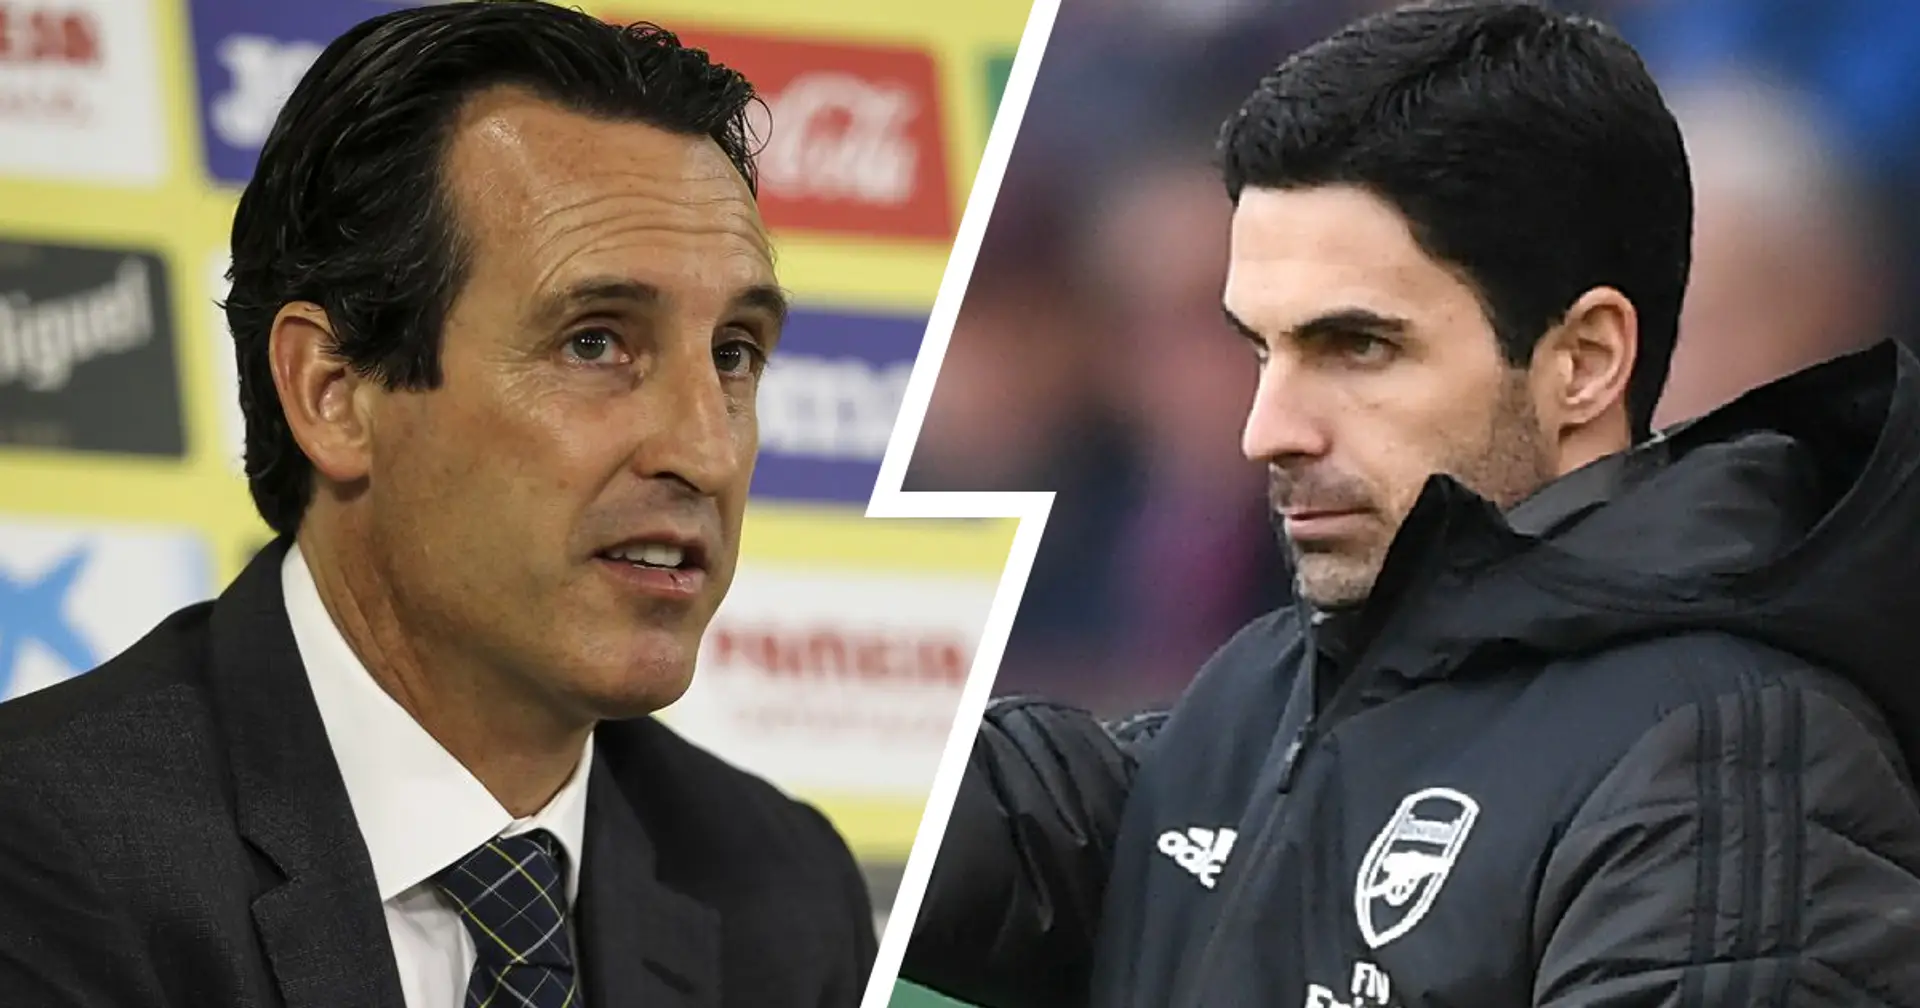 Arsenal to face Unai Emery's Villareal in Europa League semifinals